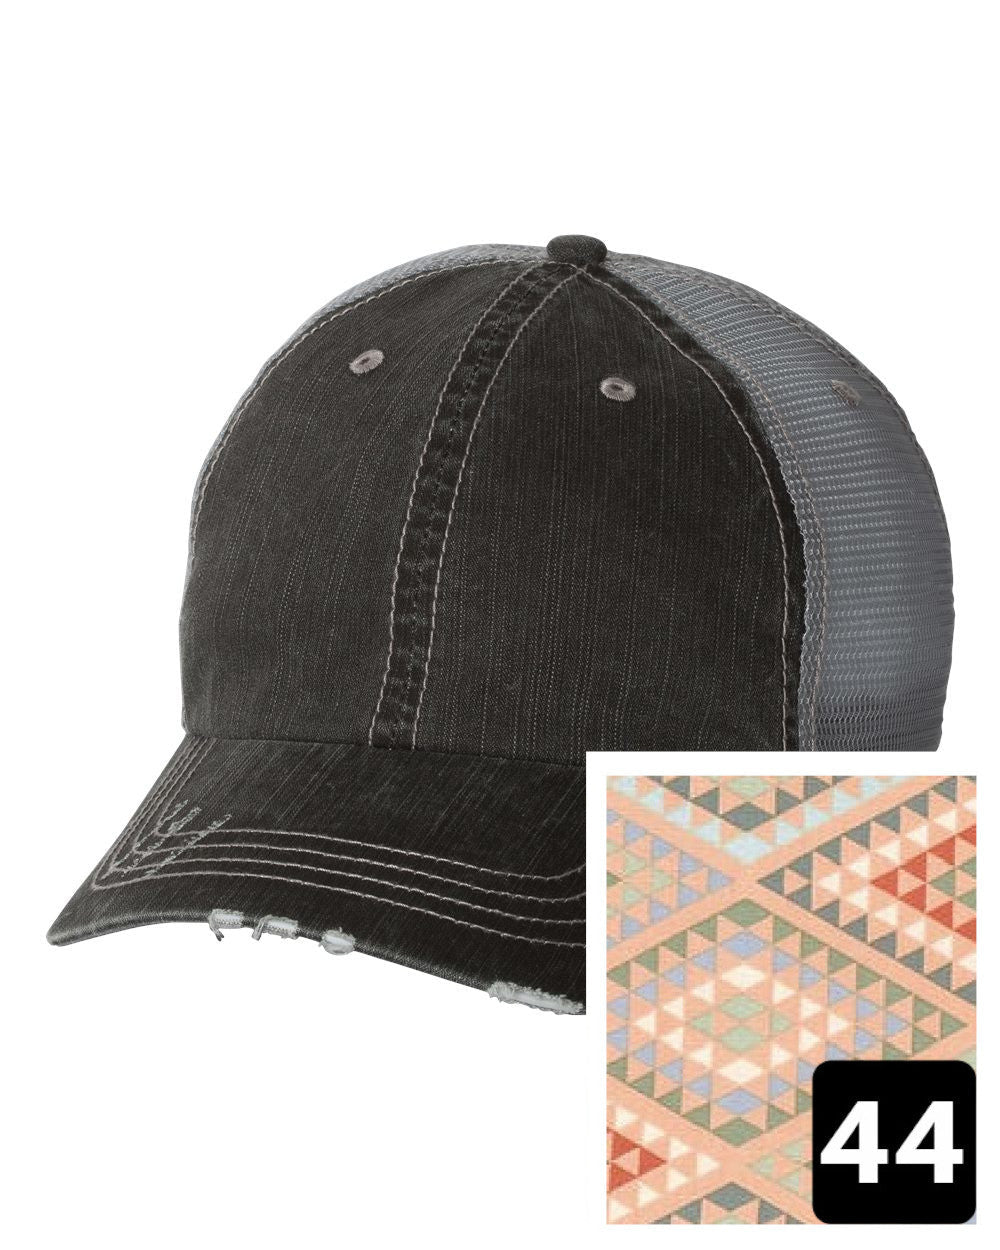 gray distressed trucker hat with navy coral and white chevron fabric state of Ohio